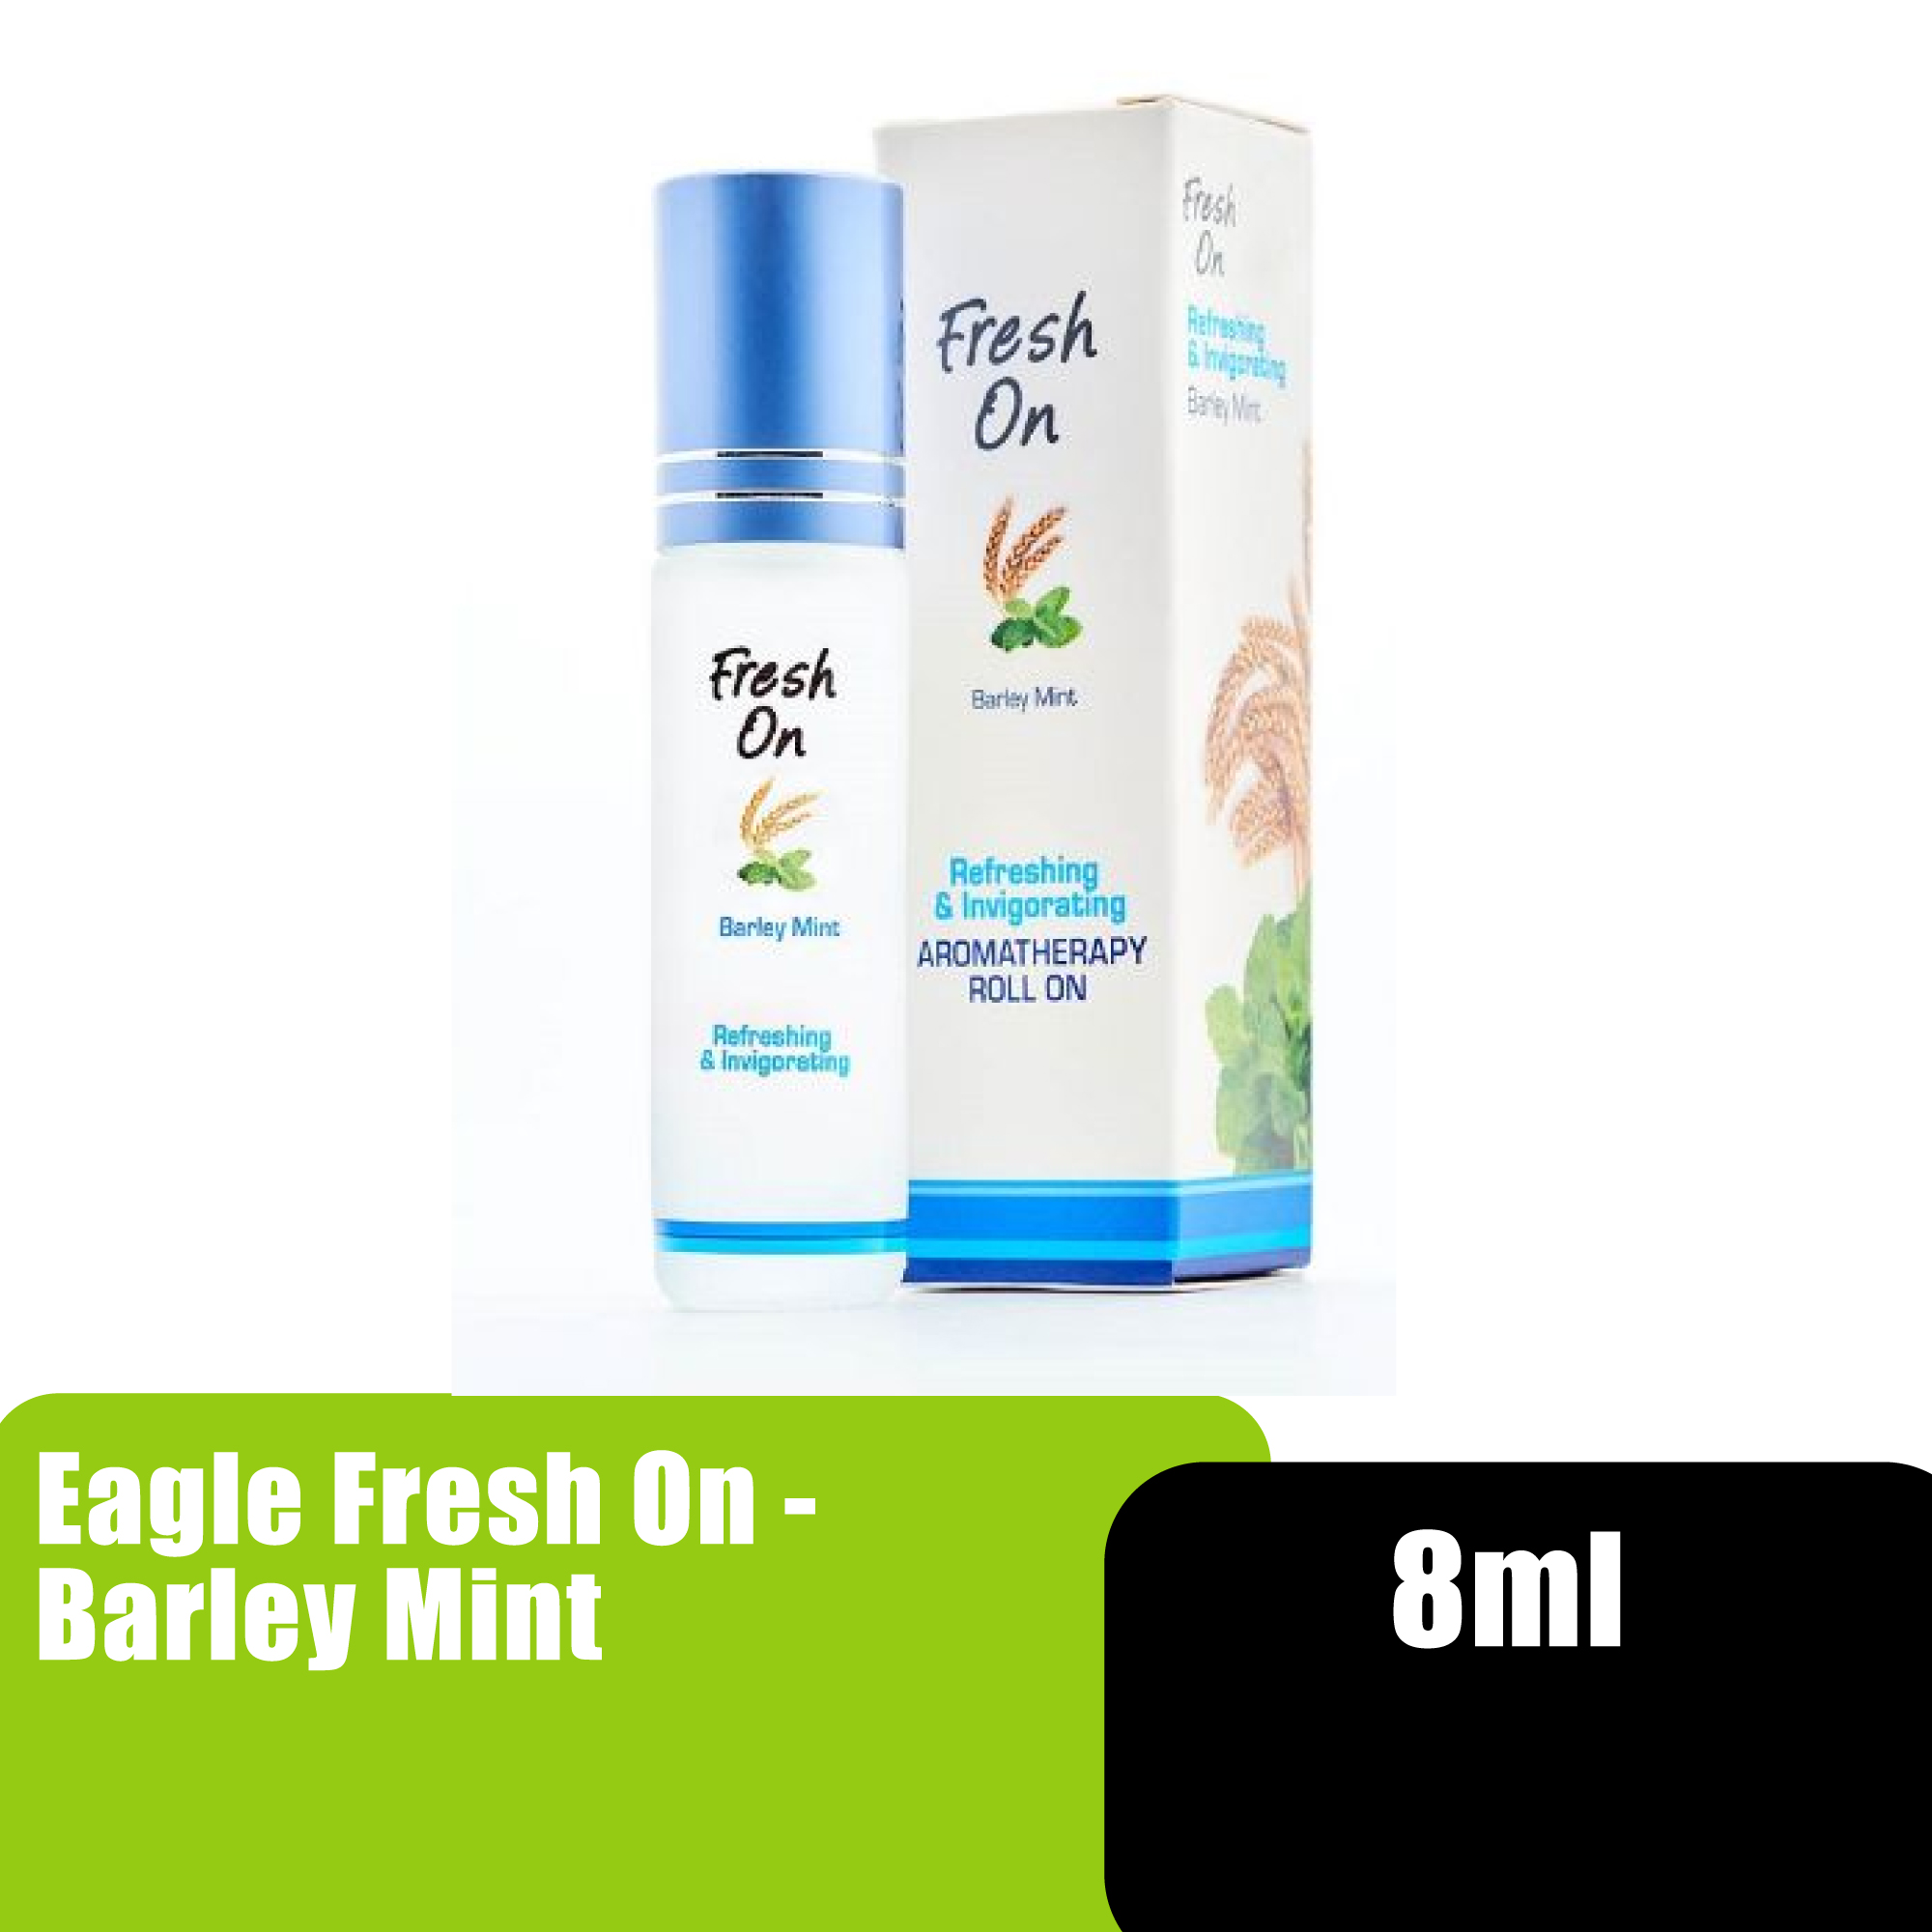 Eagle Fresh On Roll on Aromatherapy Oil 8ml -Barley Mint / 滚珠薄荷精油 (Suitable for Sickness motion & Nausea)